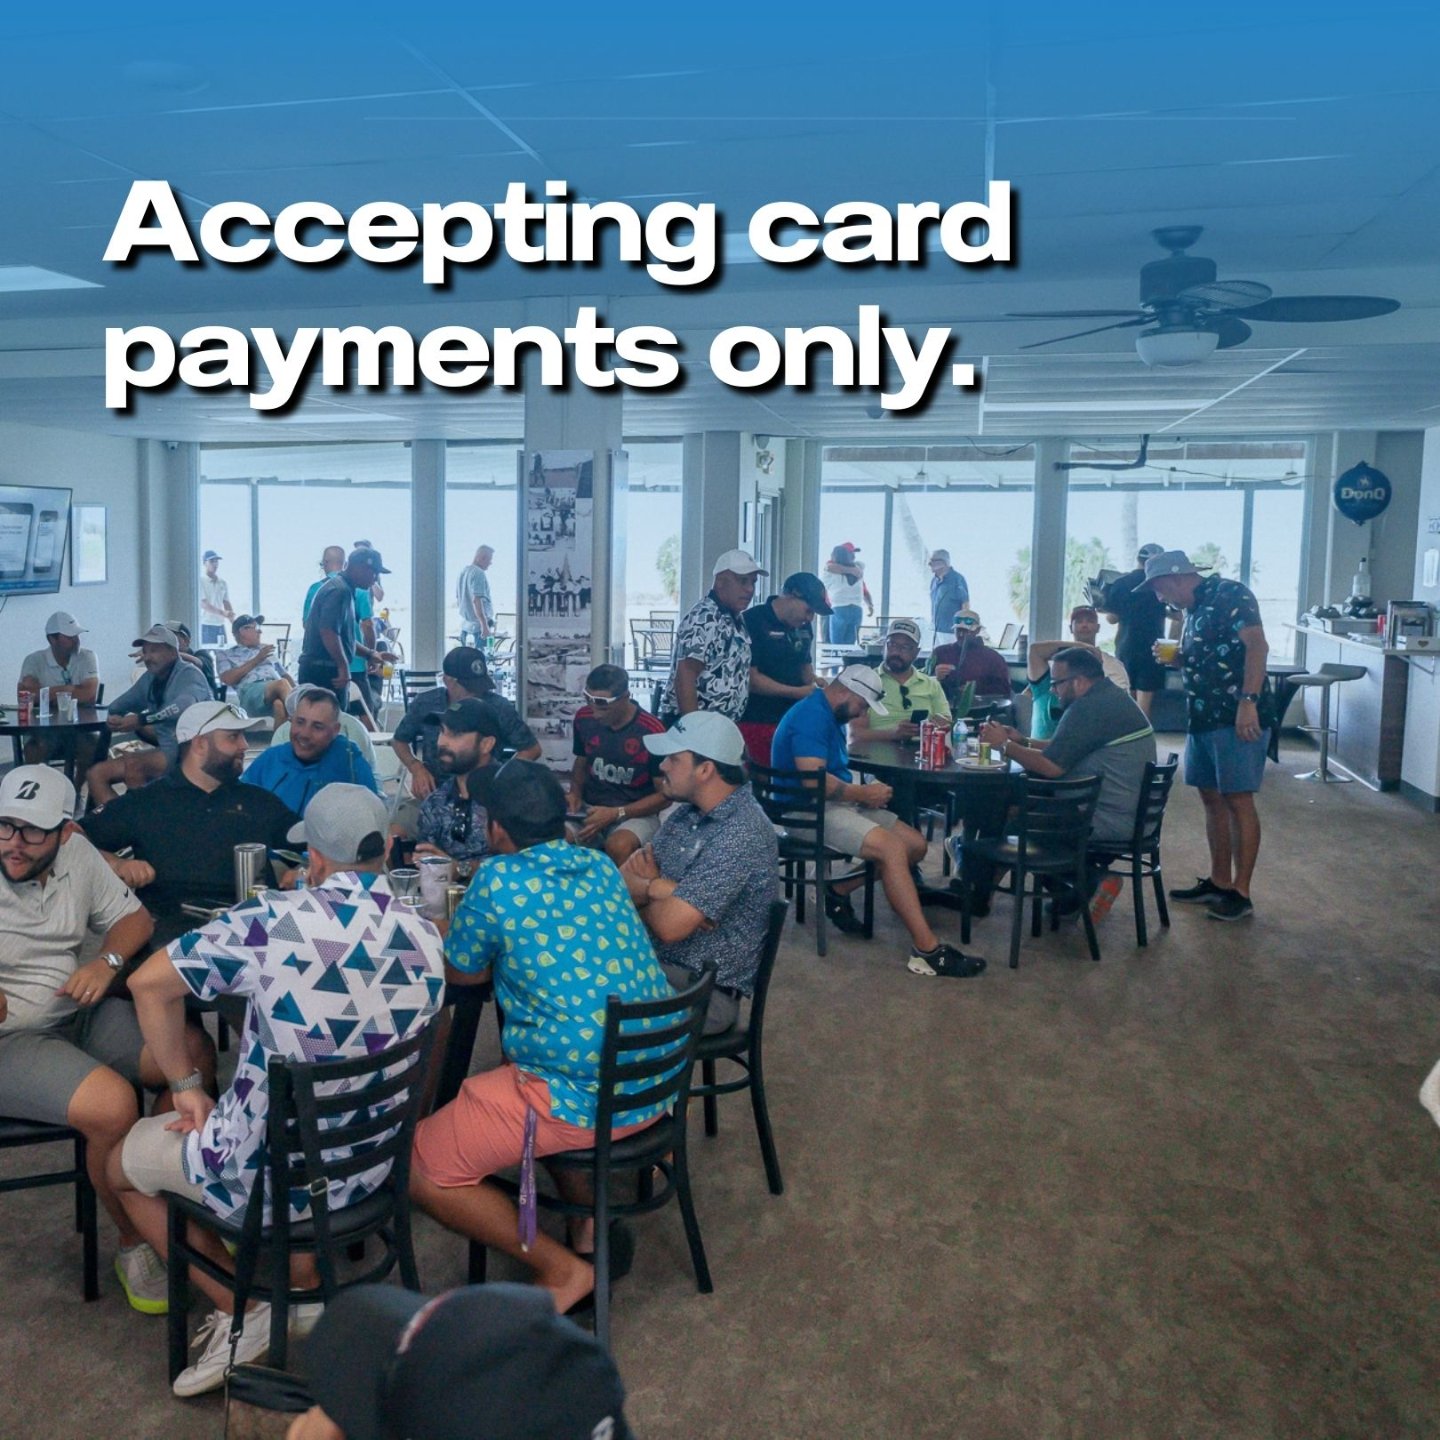 Starting Monday, May 6th, only credit and debit card payments will be accepted. Cash payments will no longer be accepted. Be advised.